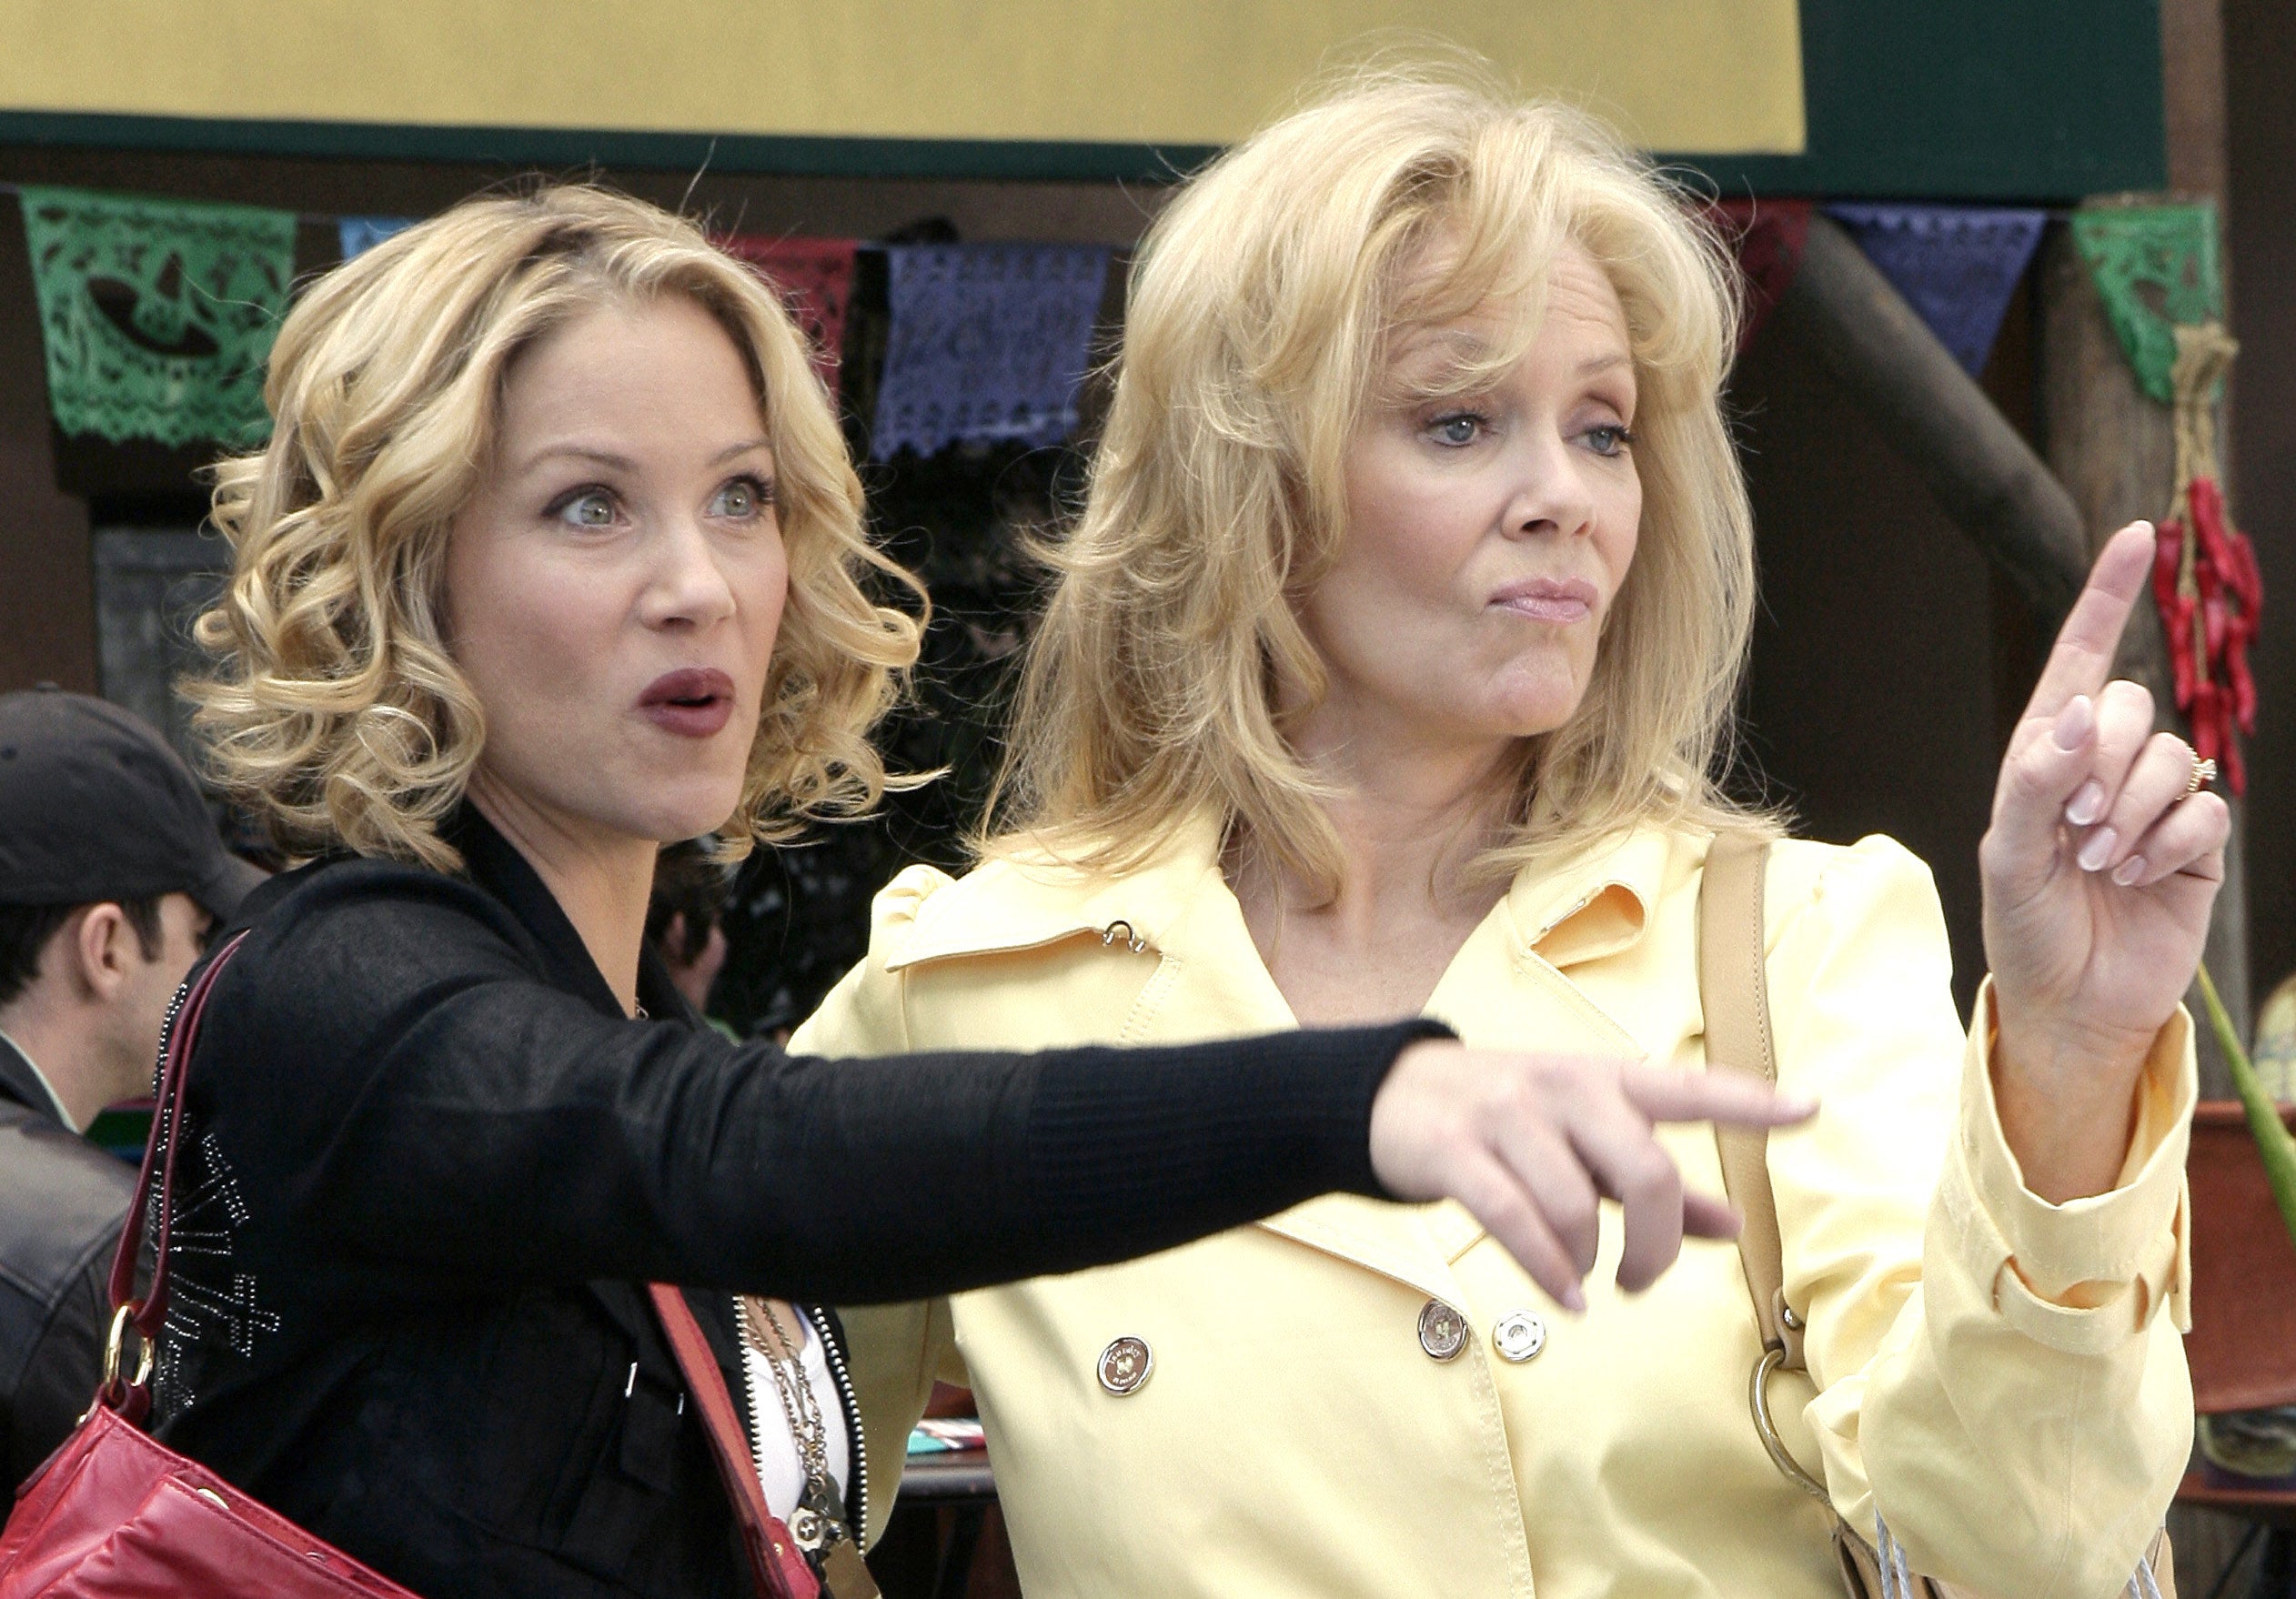 Two blonde women with their fingers raised talking to someone offscreen